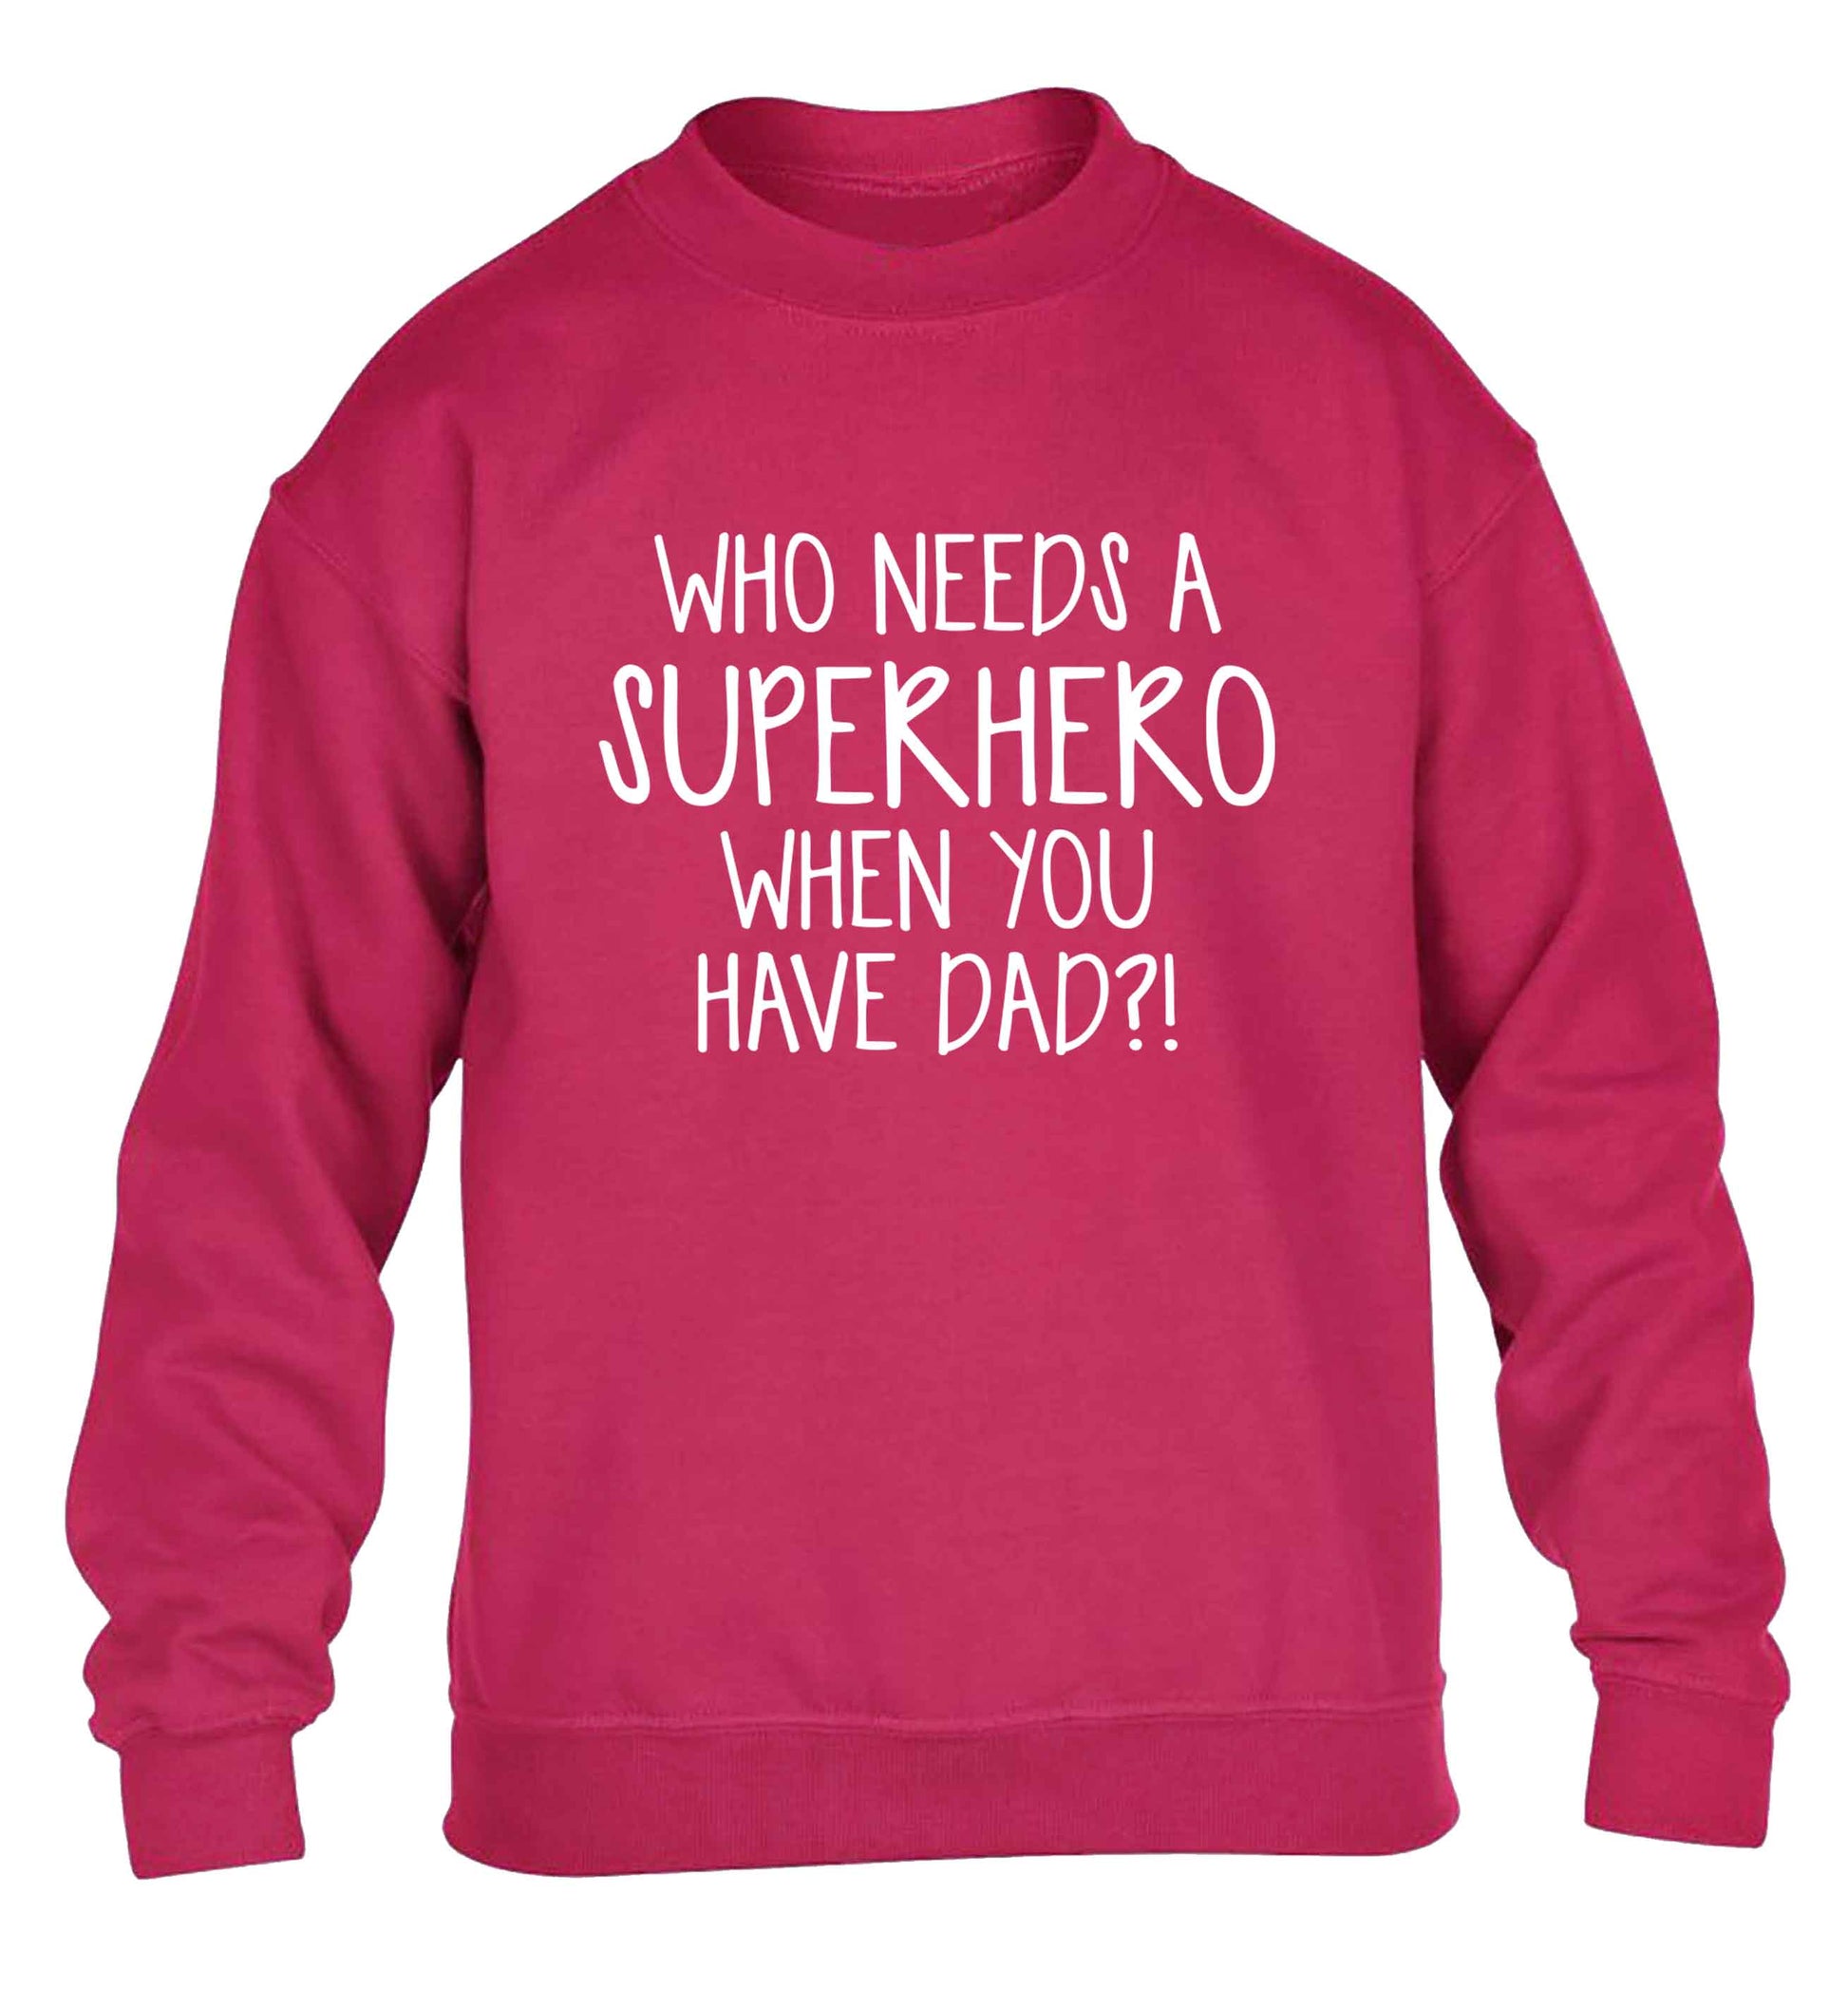 Who needs a superhero when you have dad! children's pink sweater 12-13 Years